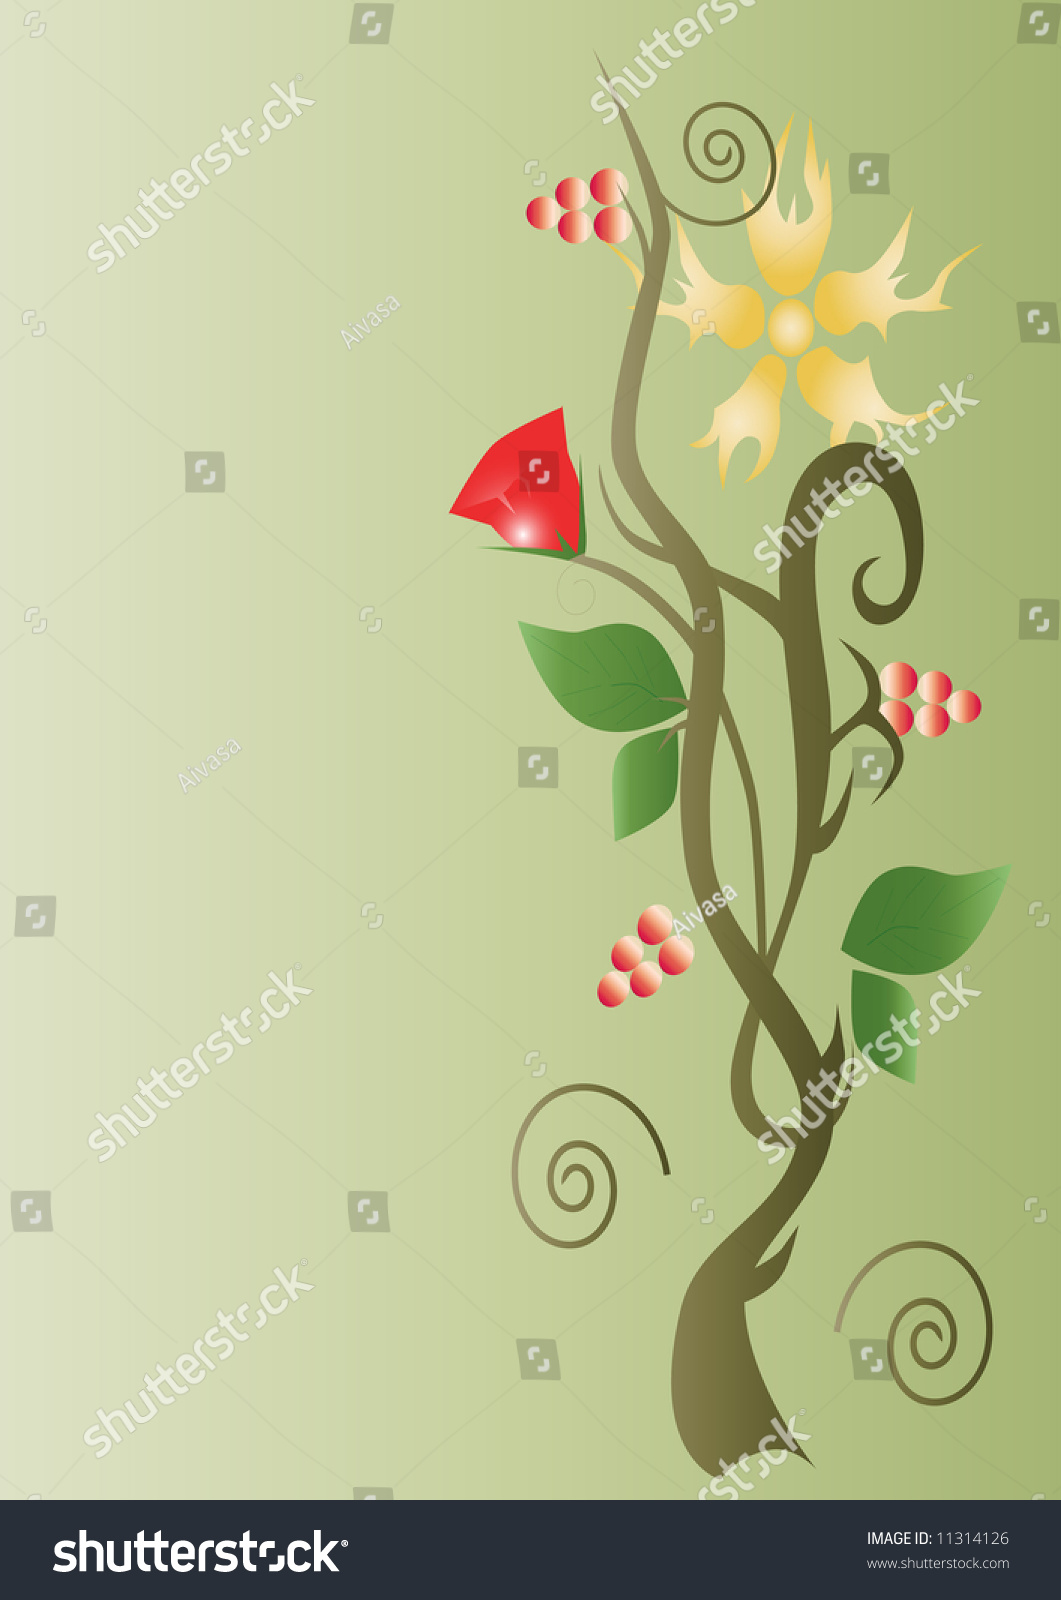 Flower With Stem And Leaves Stock Vector Illustration 11314126